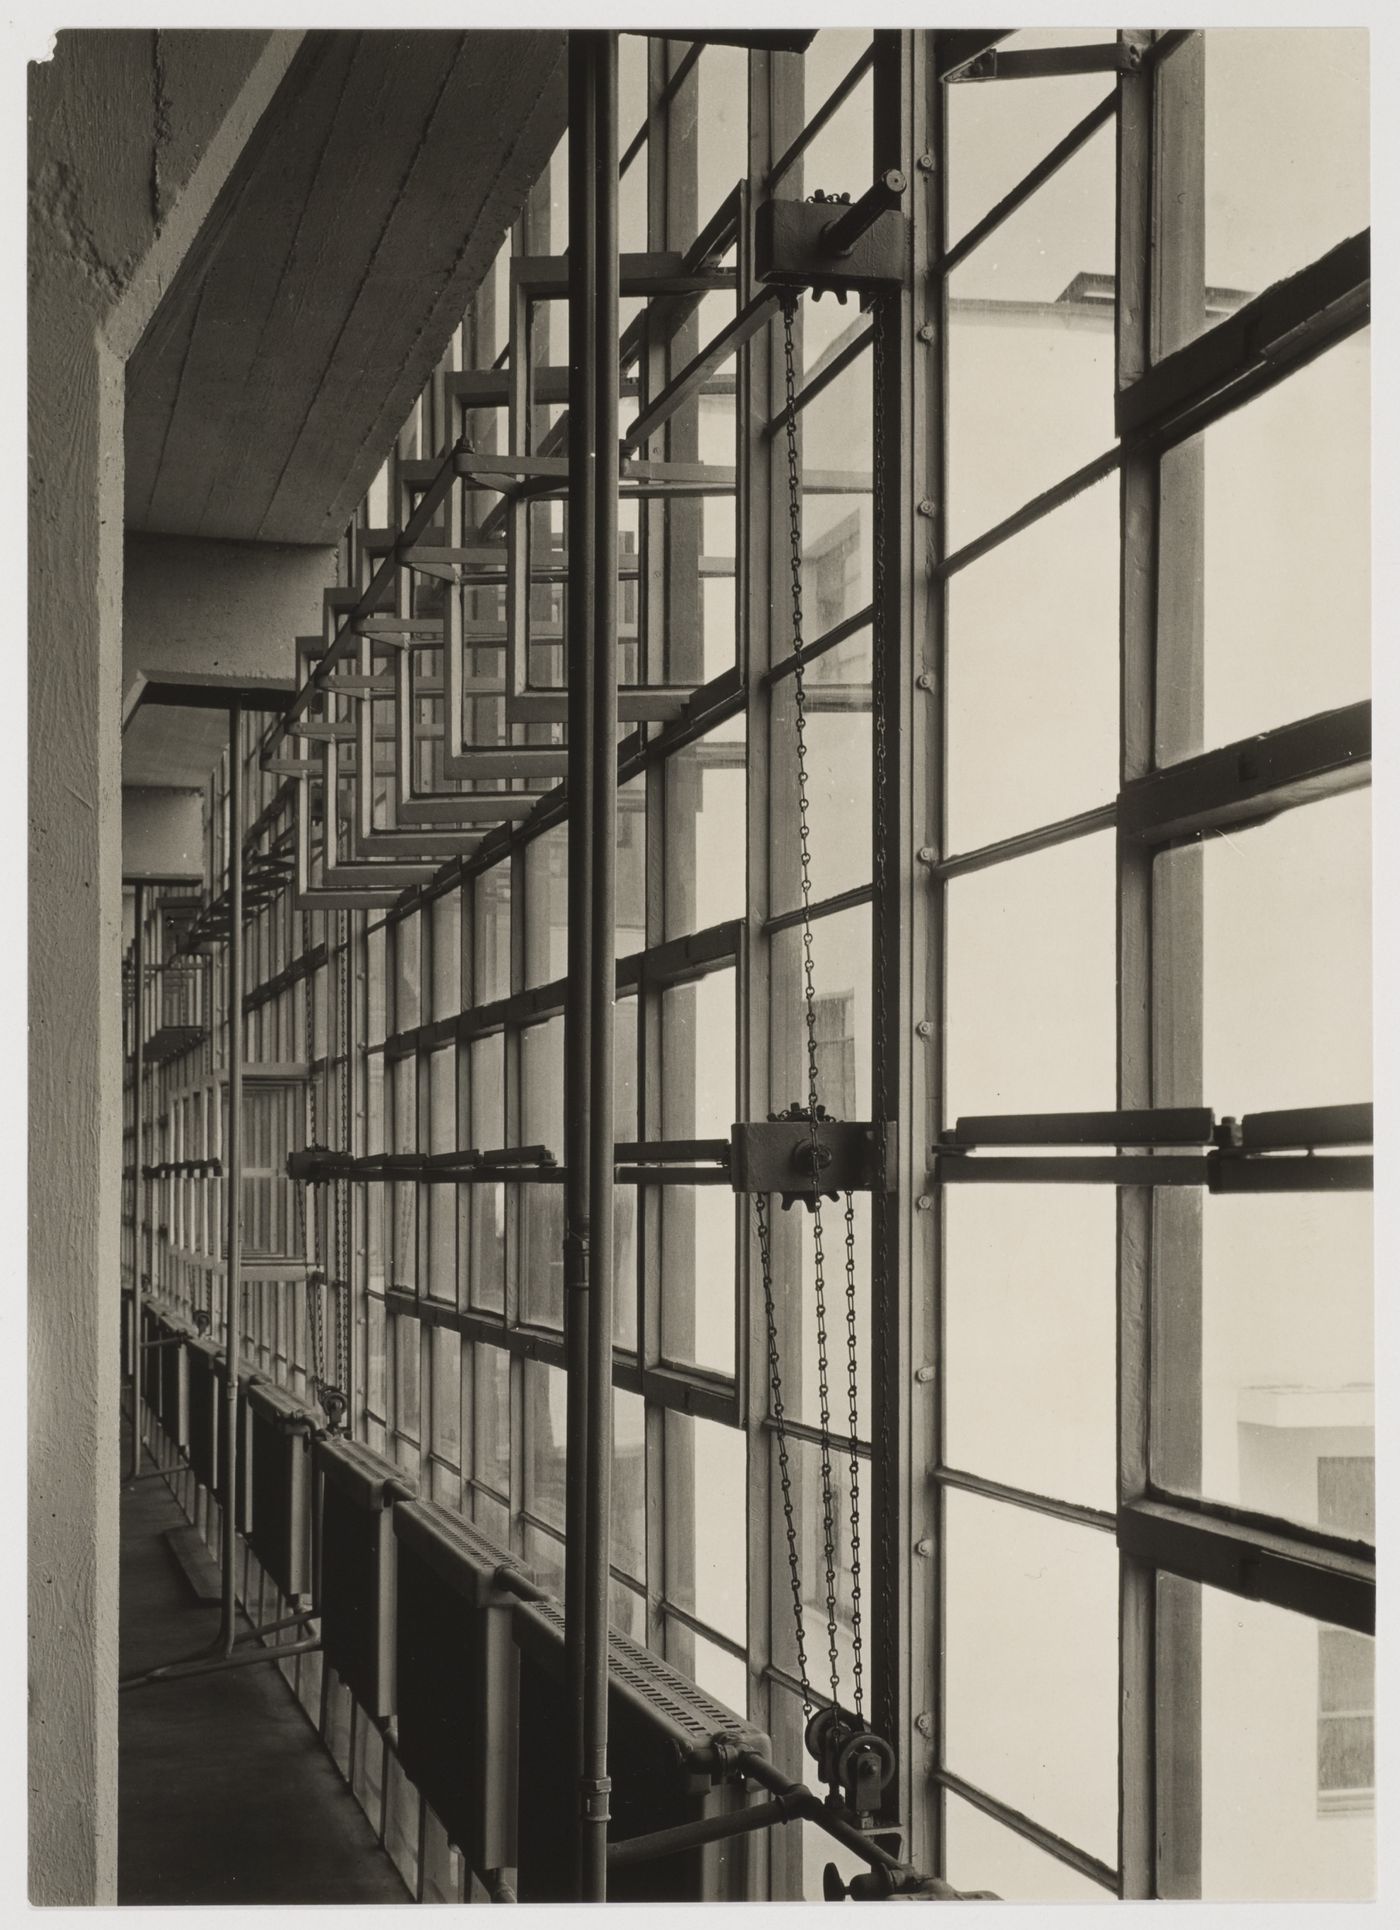 Interior view of the Bauhaus building showing the workshop windows, Dessau, Germany